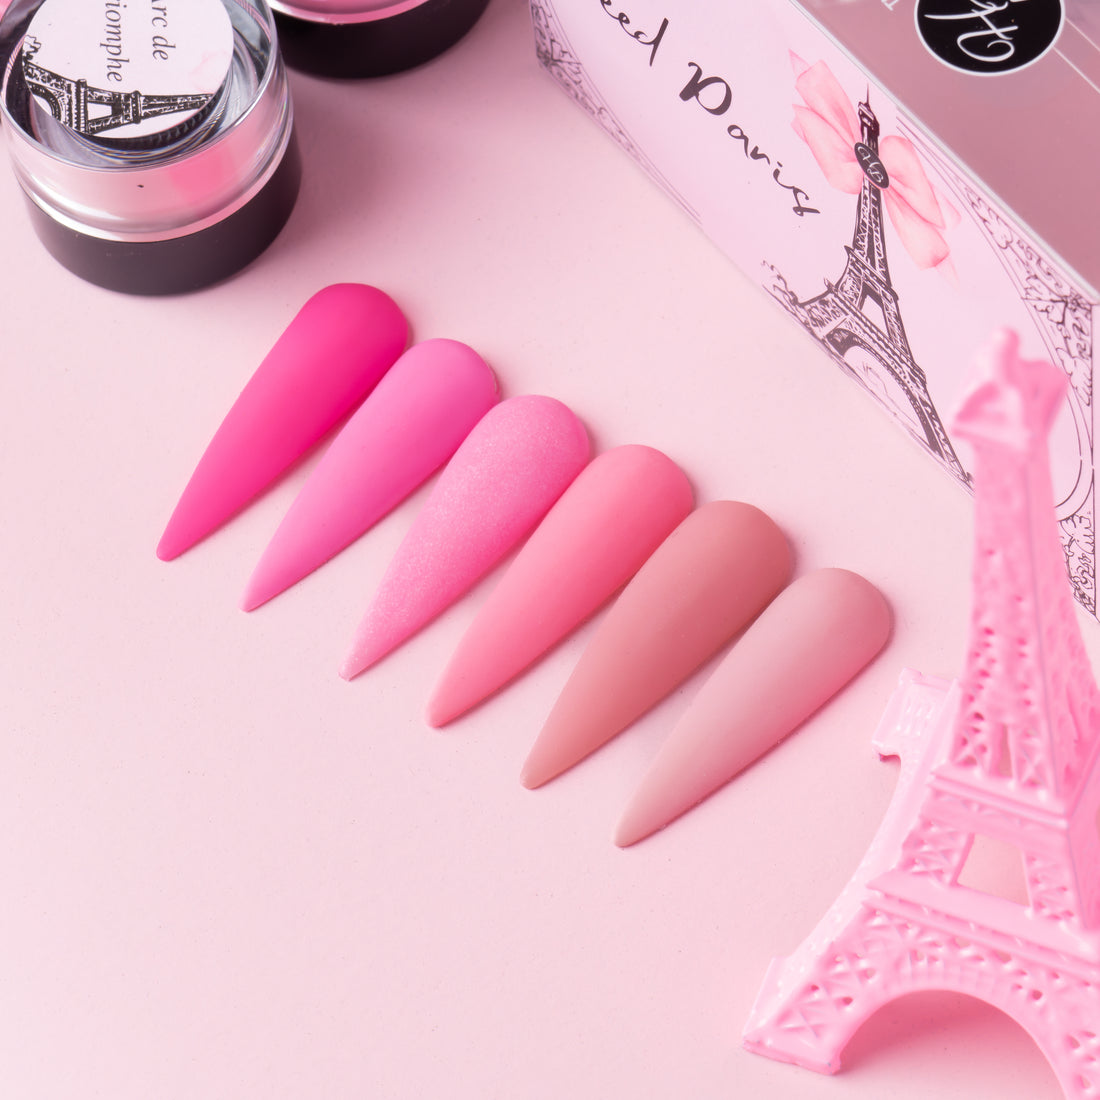 I Need Paris | Pink Acrylic Collection